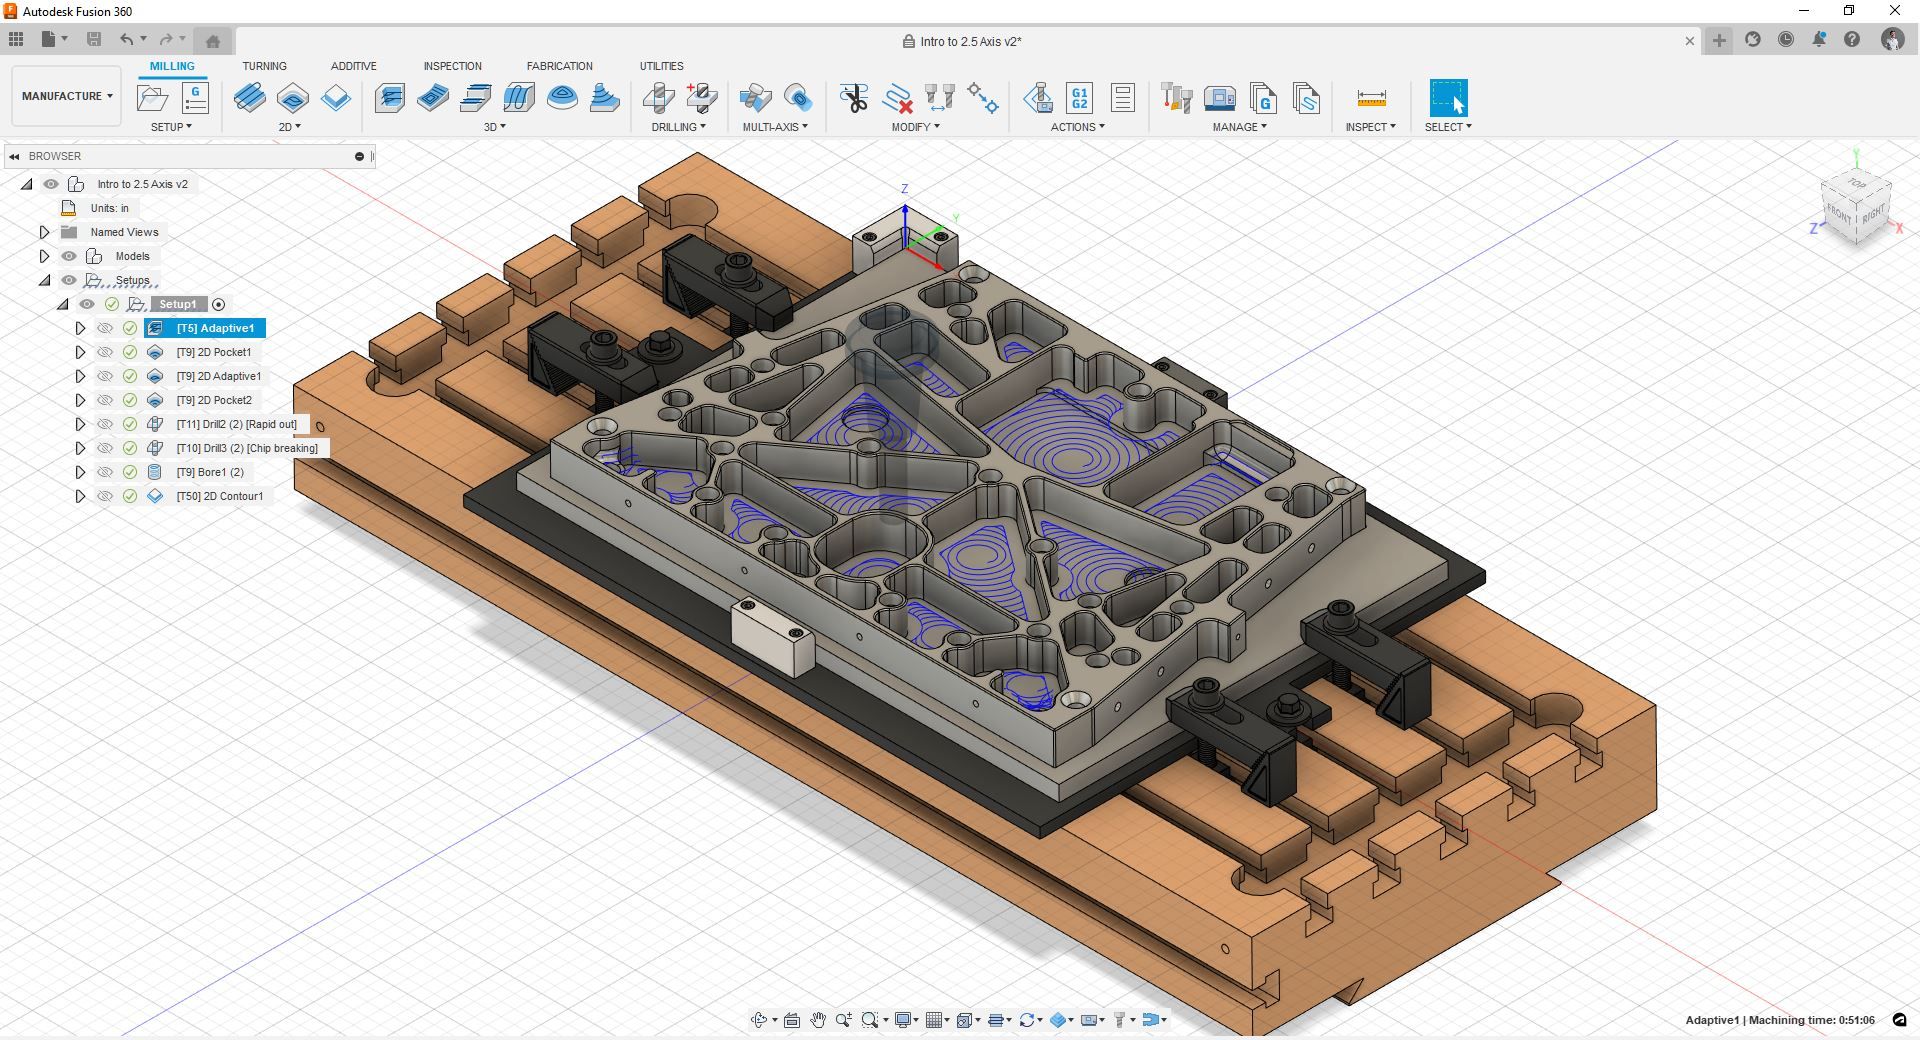 Screenshot of a model in Autodesk Fusion 360